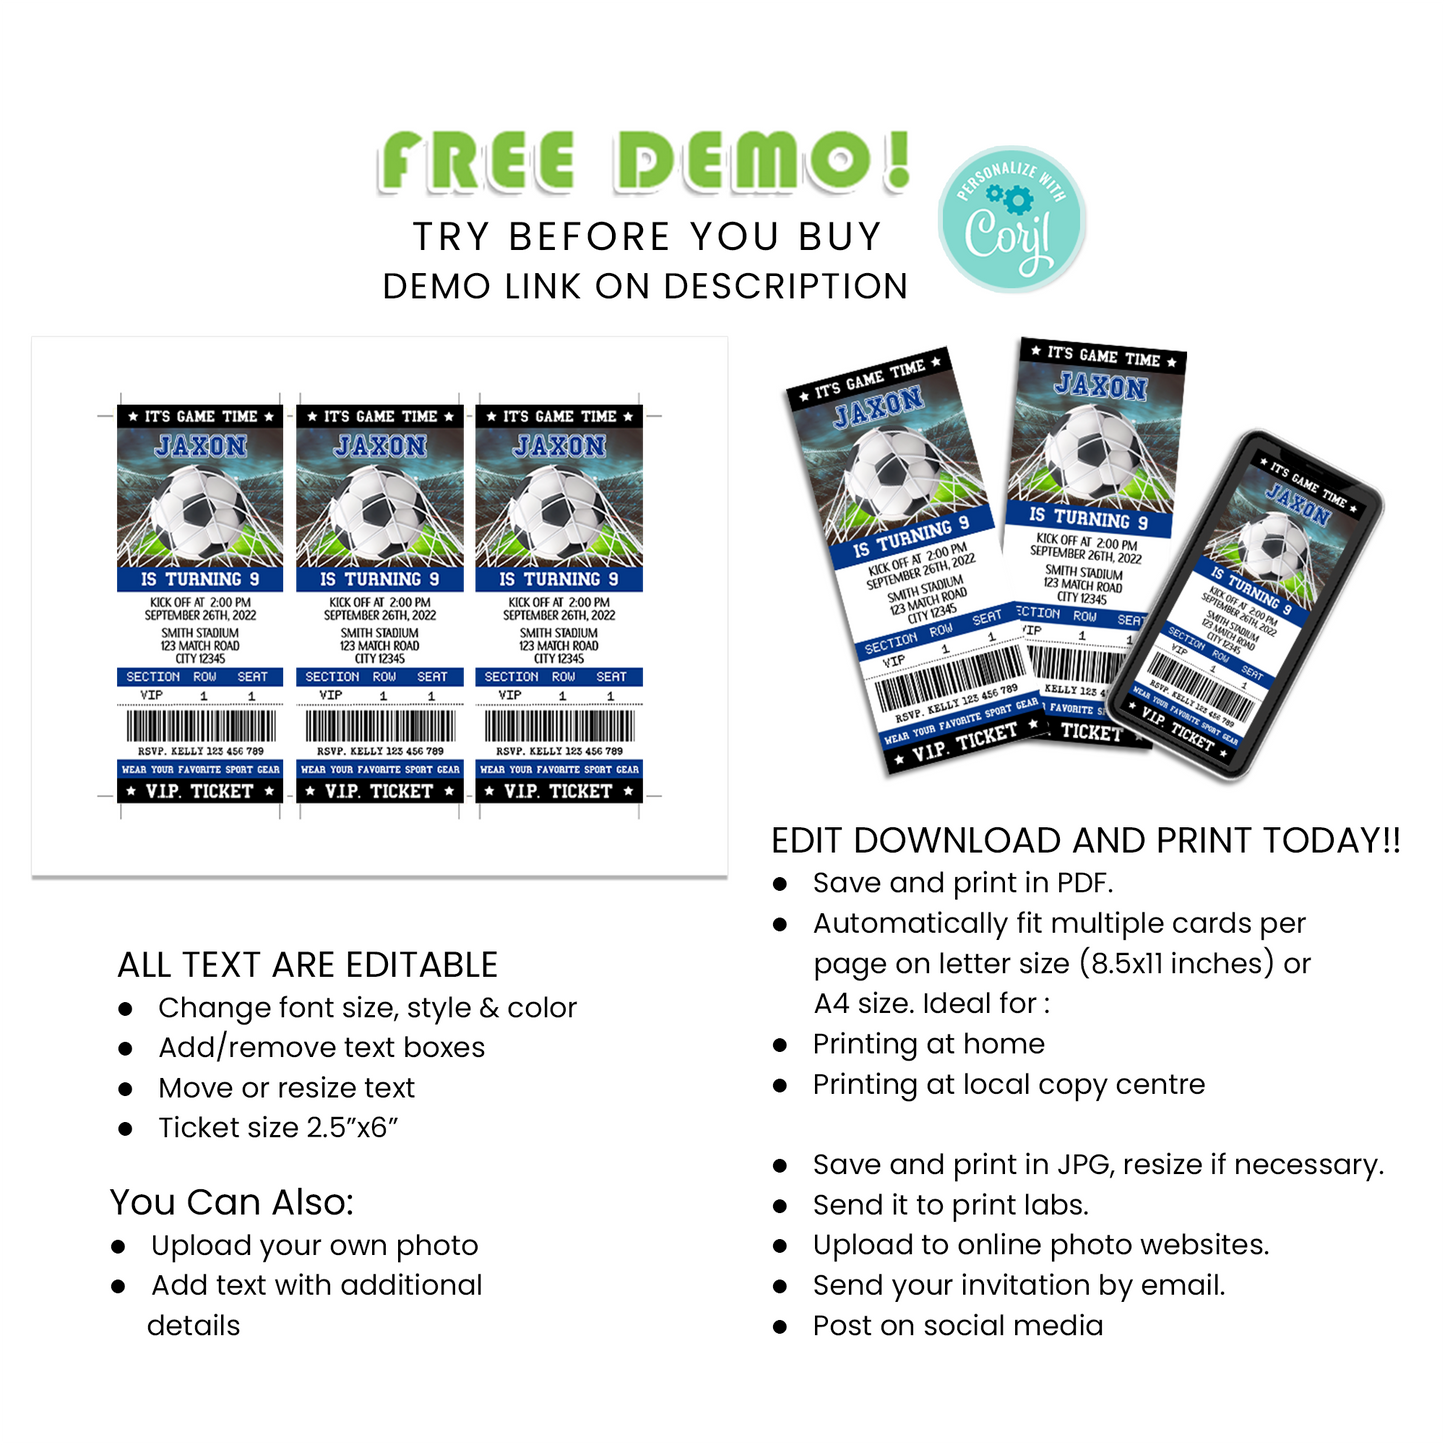 Score a Goal with Your Guests with Our Soccer Personalized Birthday Ticket Invitations - Your Golden Ticket to a Fun-Filled Soccer Party!